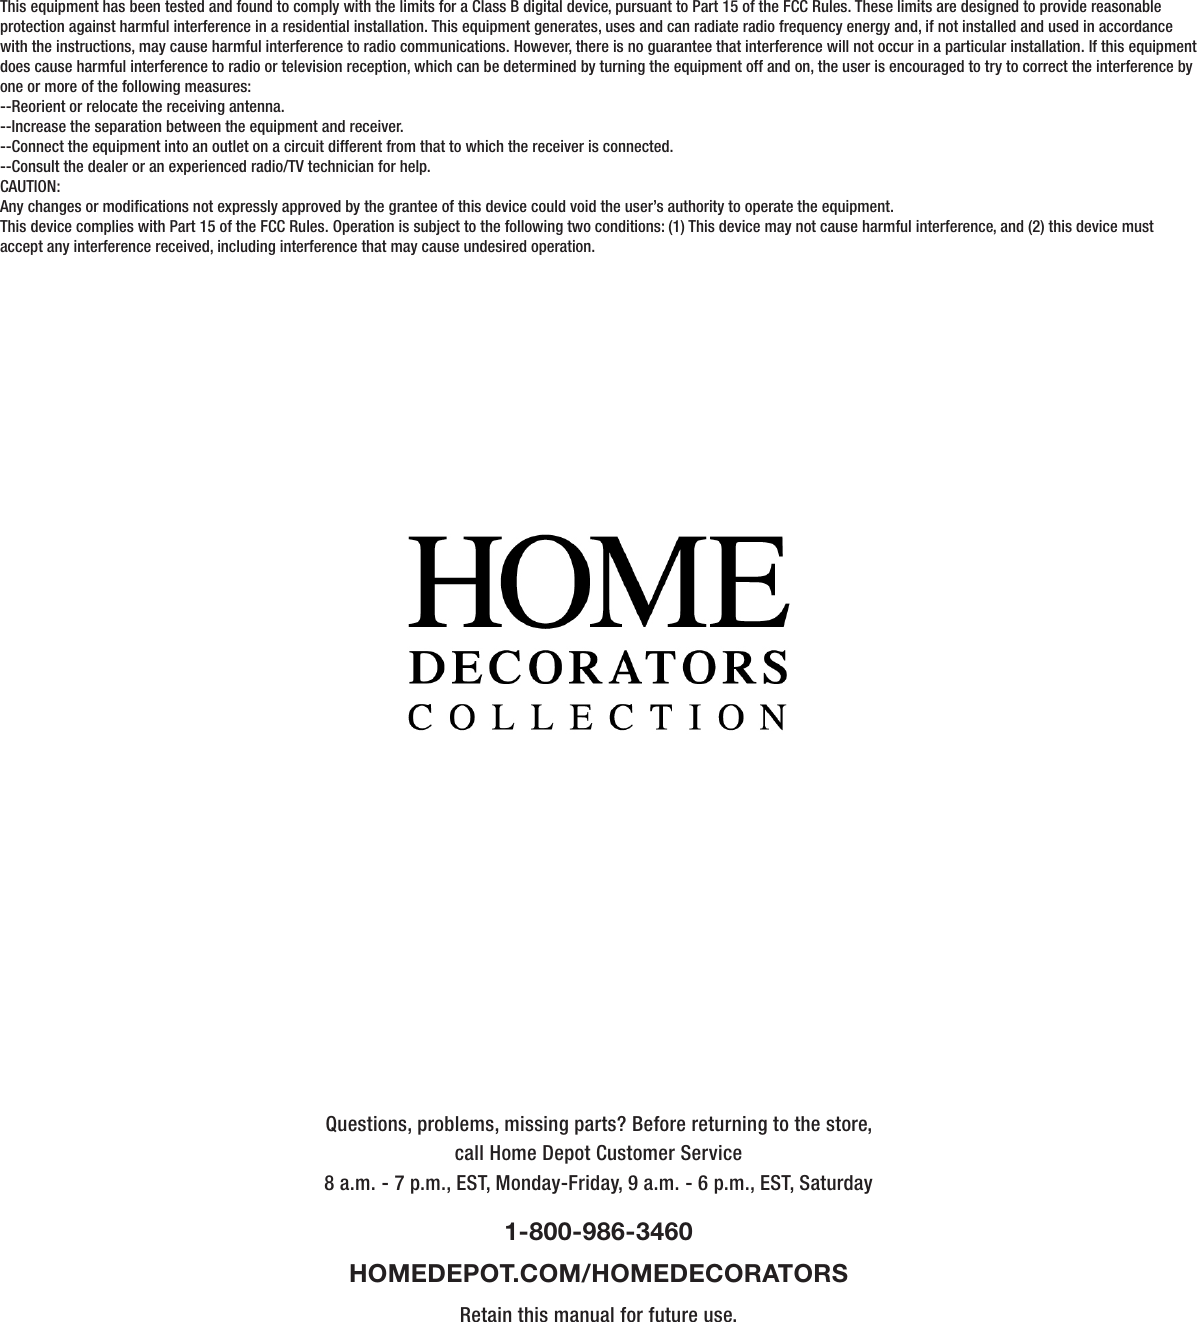 Questions, problems, missing parts? Before returning to the store,call Home Depot Customer Service8 a.m. - 7 p.m., EST, Monday-Friday, 9 a.m. - 6 p.m., EST, Saturday1-800-986-3460HOMEDEPOT.COM/HOMEDECORATORSRetain this manual for future use.This equipment has been tested and found to comply with the limits for a Class B digital device, pursuant to Part 15 of the FCC Rules. These limits are designed to provide reasonable protection against harmful interference in a residential installation. This equipment generates, uses and can radiate radio frequency energy and, if not installed and used in accordance with the instructions, may cause harmful interference to radio communications. However, there is no guarantee that interference will not occur in a particular installation. If this equipment does cause harmful interference to radio or television reception, which can be determined by turning the equipment off and on, the user is encouraged to try to correct the interference by one or more of the following measures:--Reorient or relocate the receiving antenna.--Increase the separation between the equipment and receiver.--Connect the equipment into an outlet on a circuit different from that to which the receiver is connected.--Consult the dealer or an experienced radio/TV technician for help.CAUTION:Any changes or modications not expressly approved by the grantee of this device could void the user’s authority to operate the equipment.This device complies with Part 15 of the FCC Rules. Operation is subject to the following two conditions: (1) This device may not cause harmful interference, and (2) this device must accept any interference received, including interference that may cause undesired operation.      